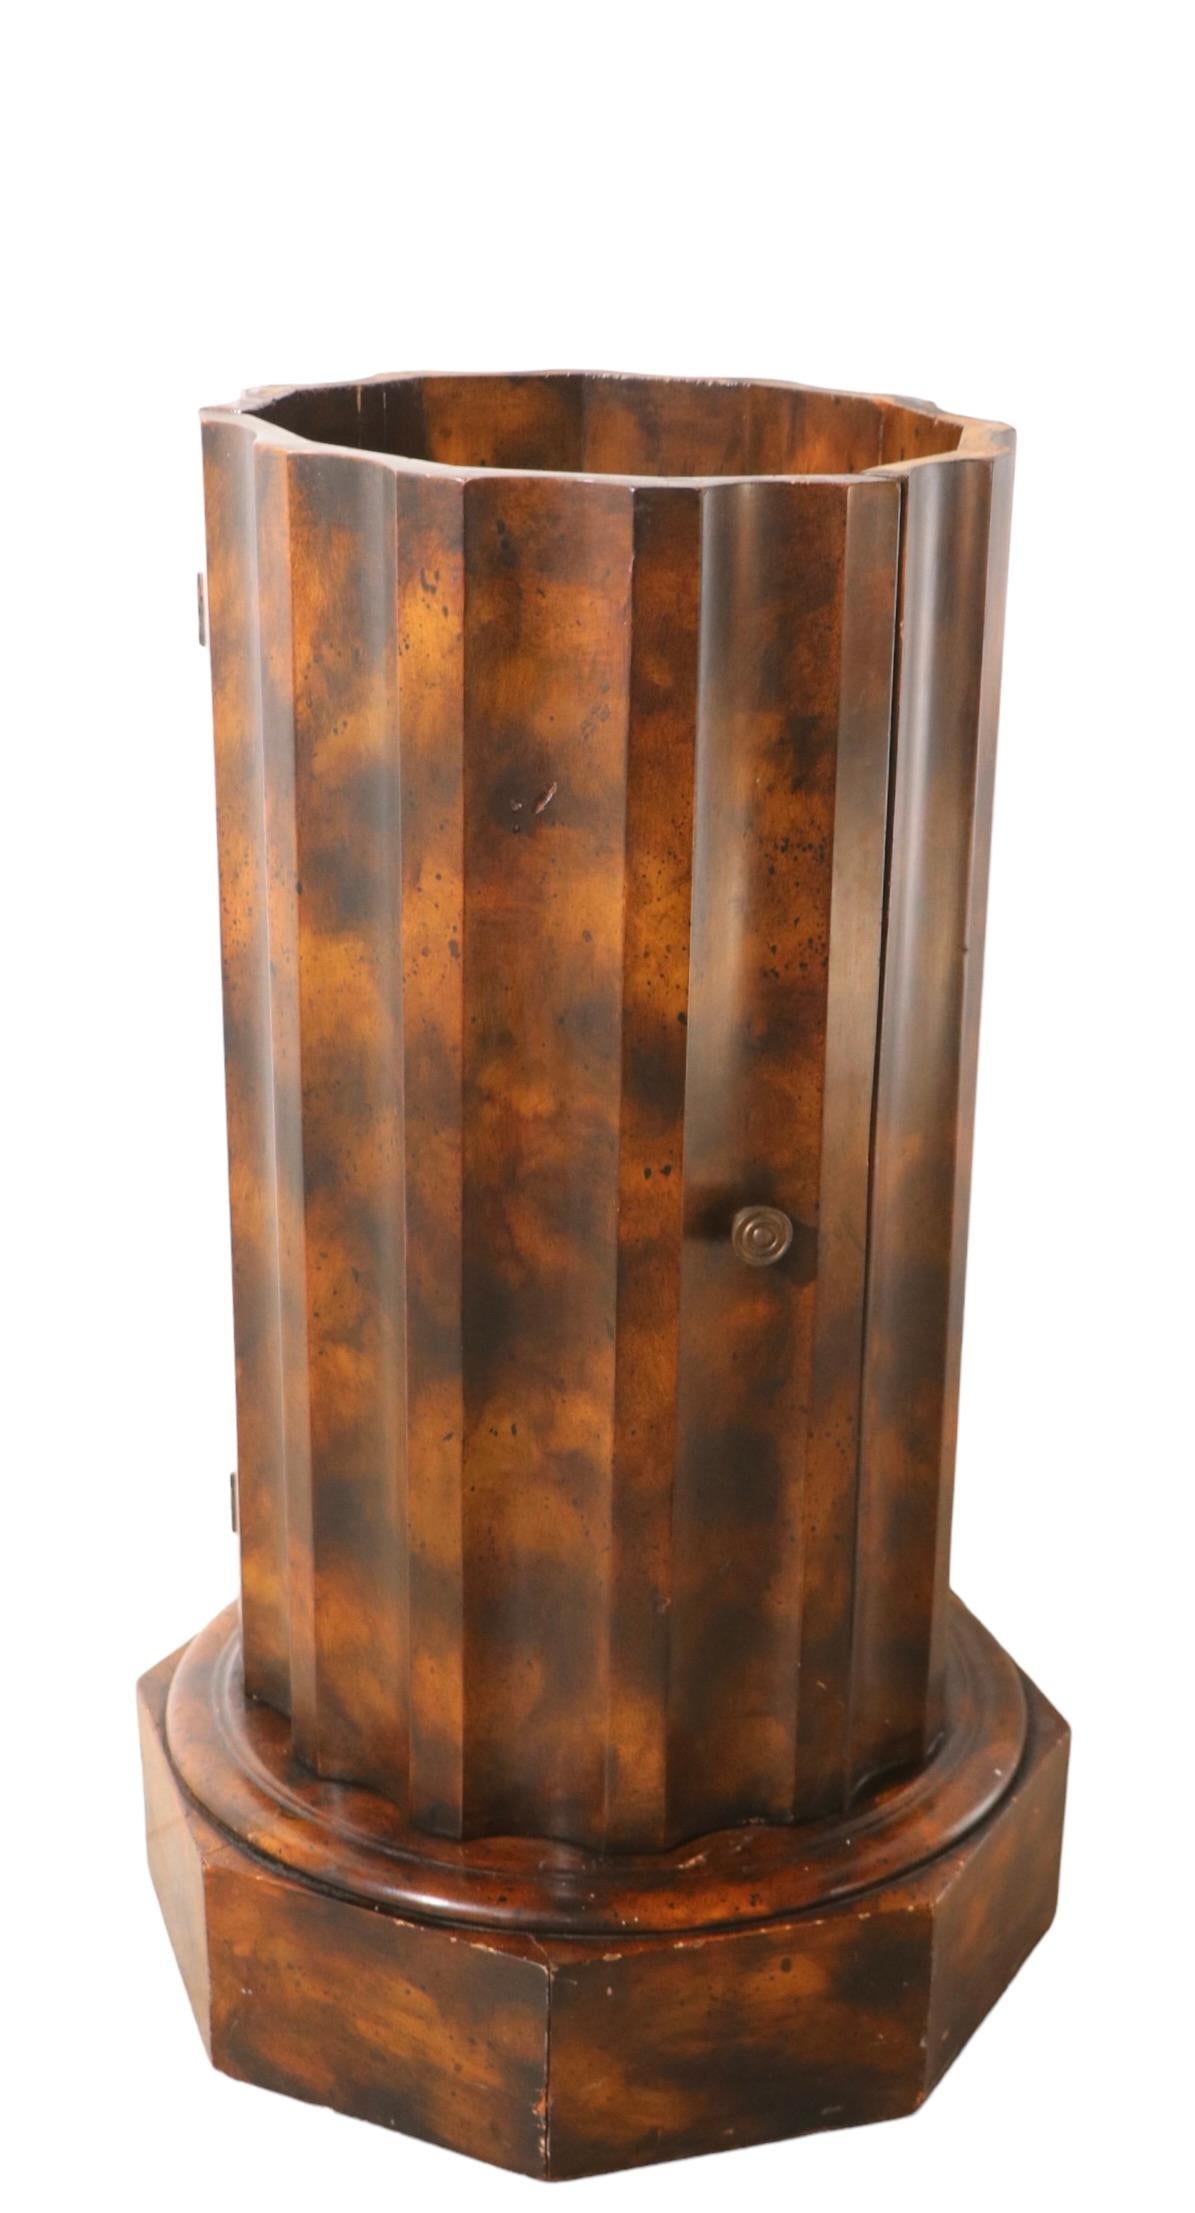 Pr. Decorative Marble Top Half Column Pedestals in Faux Tortoise Shell Finish For Sale 7